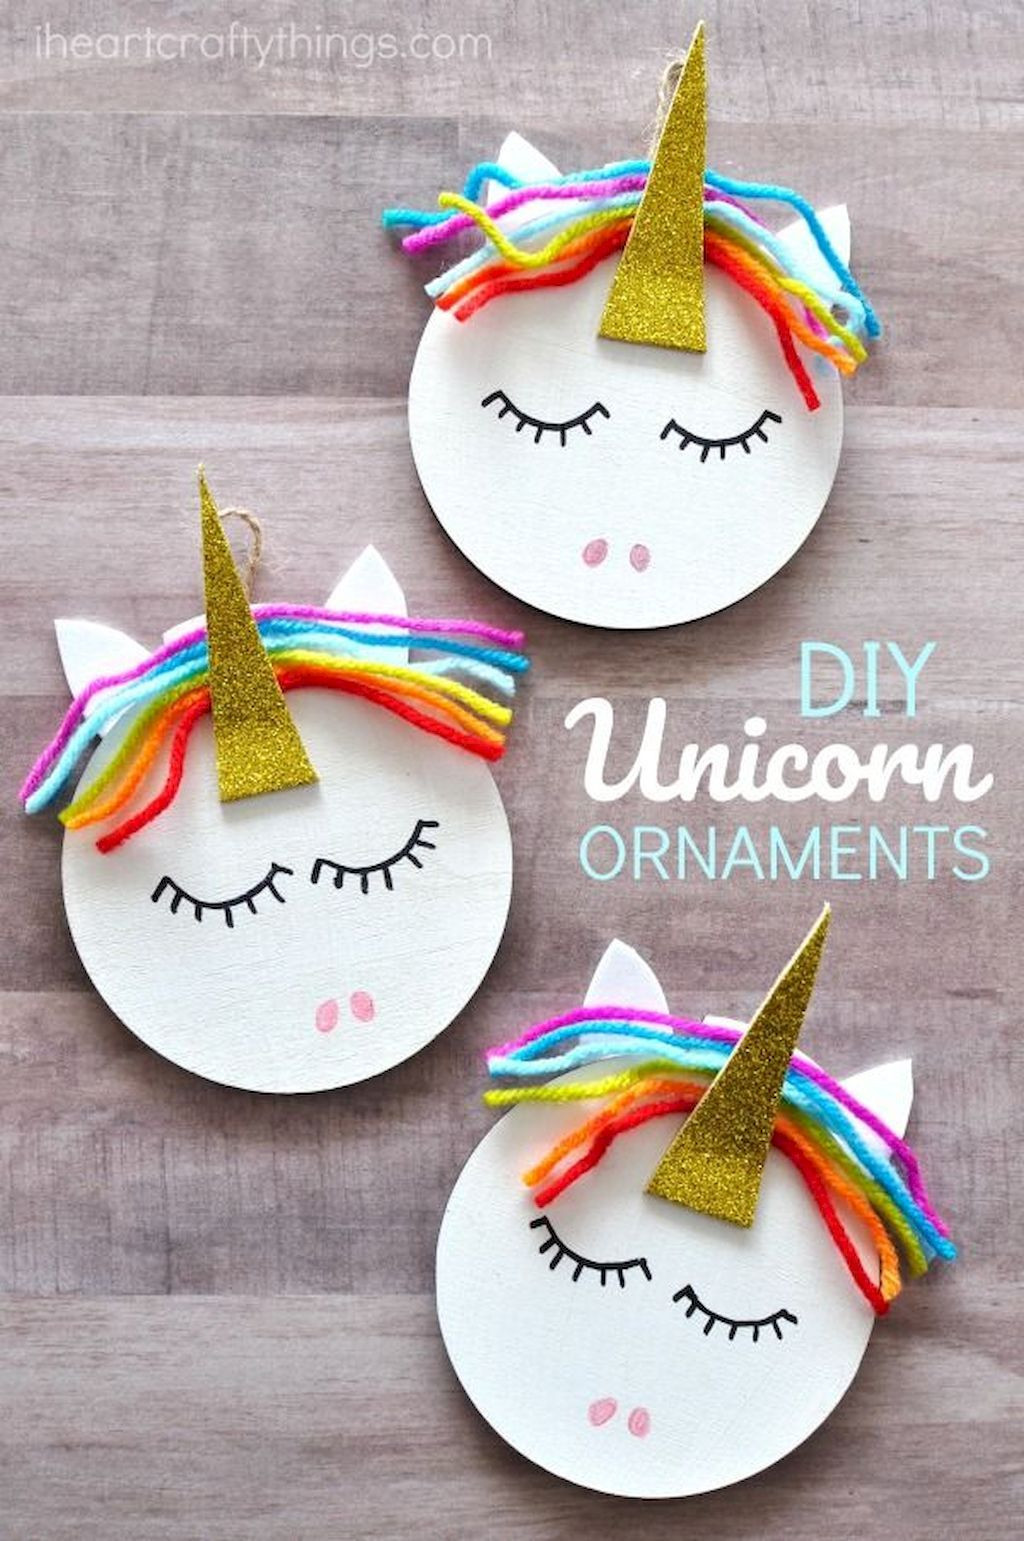 Easy DIY Crafts For Kids
 20 Cheap and Easy DIY Crafts Ideas For Kids